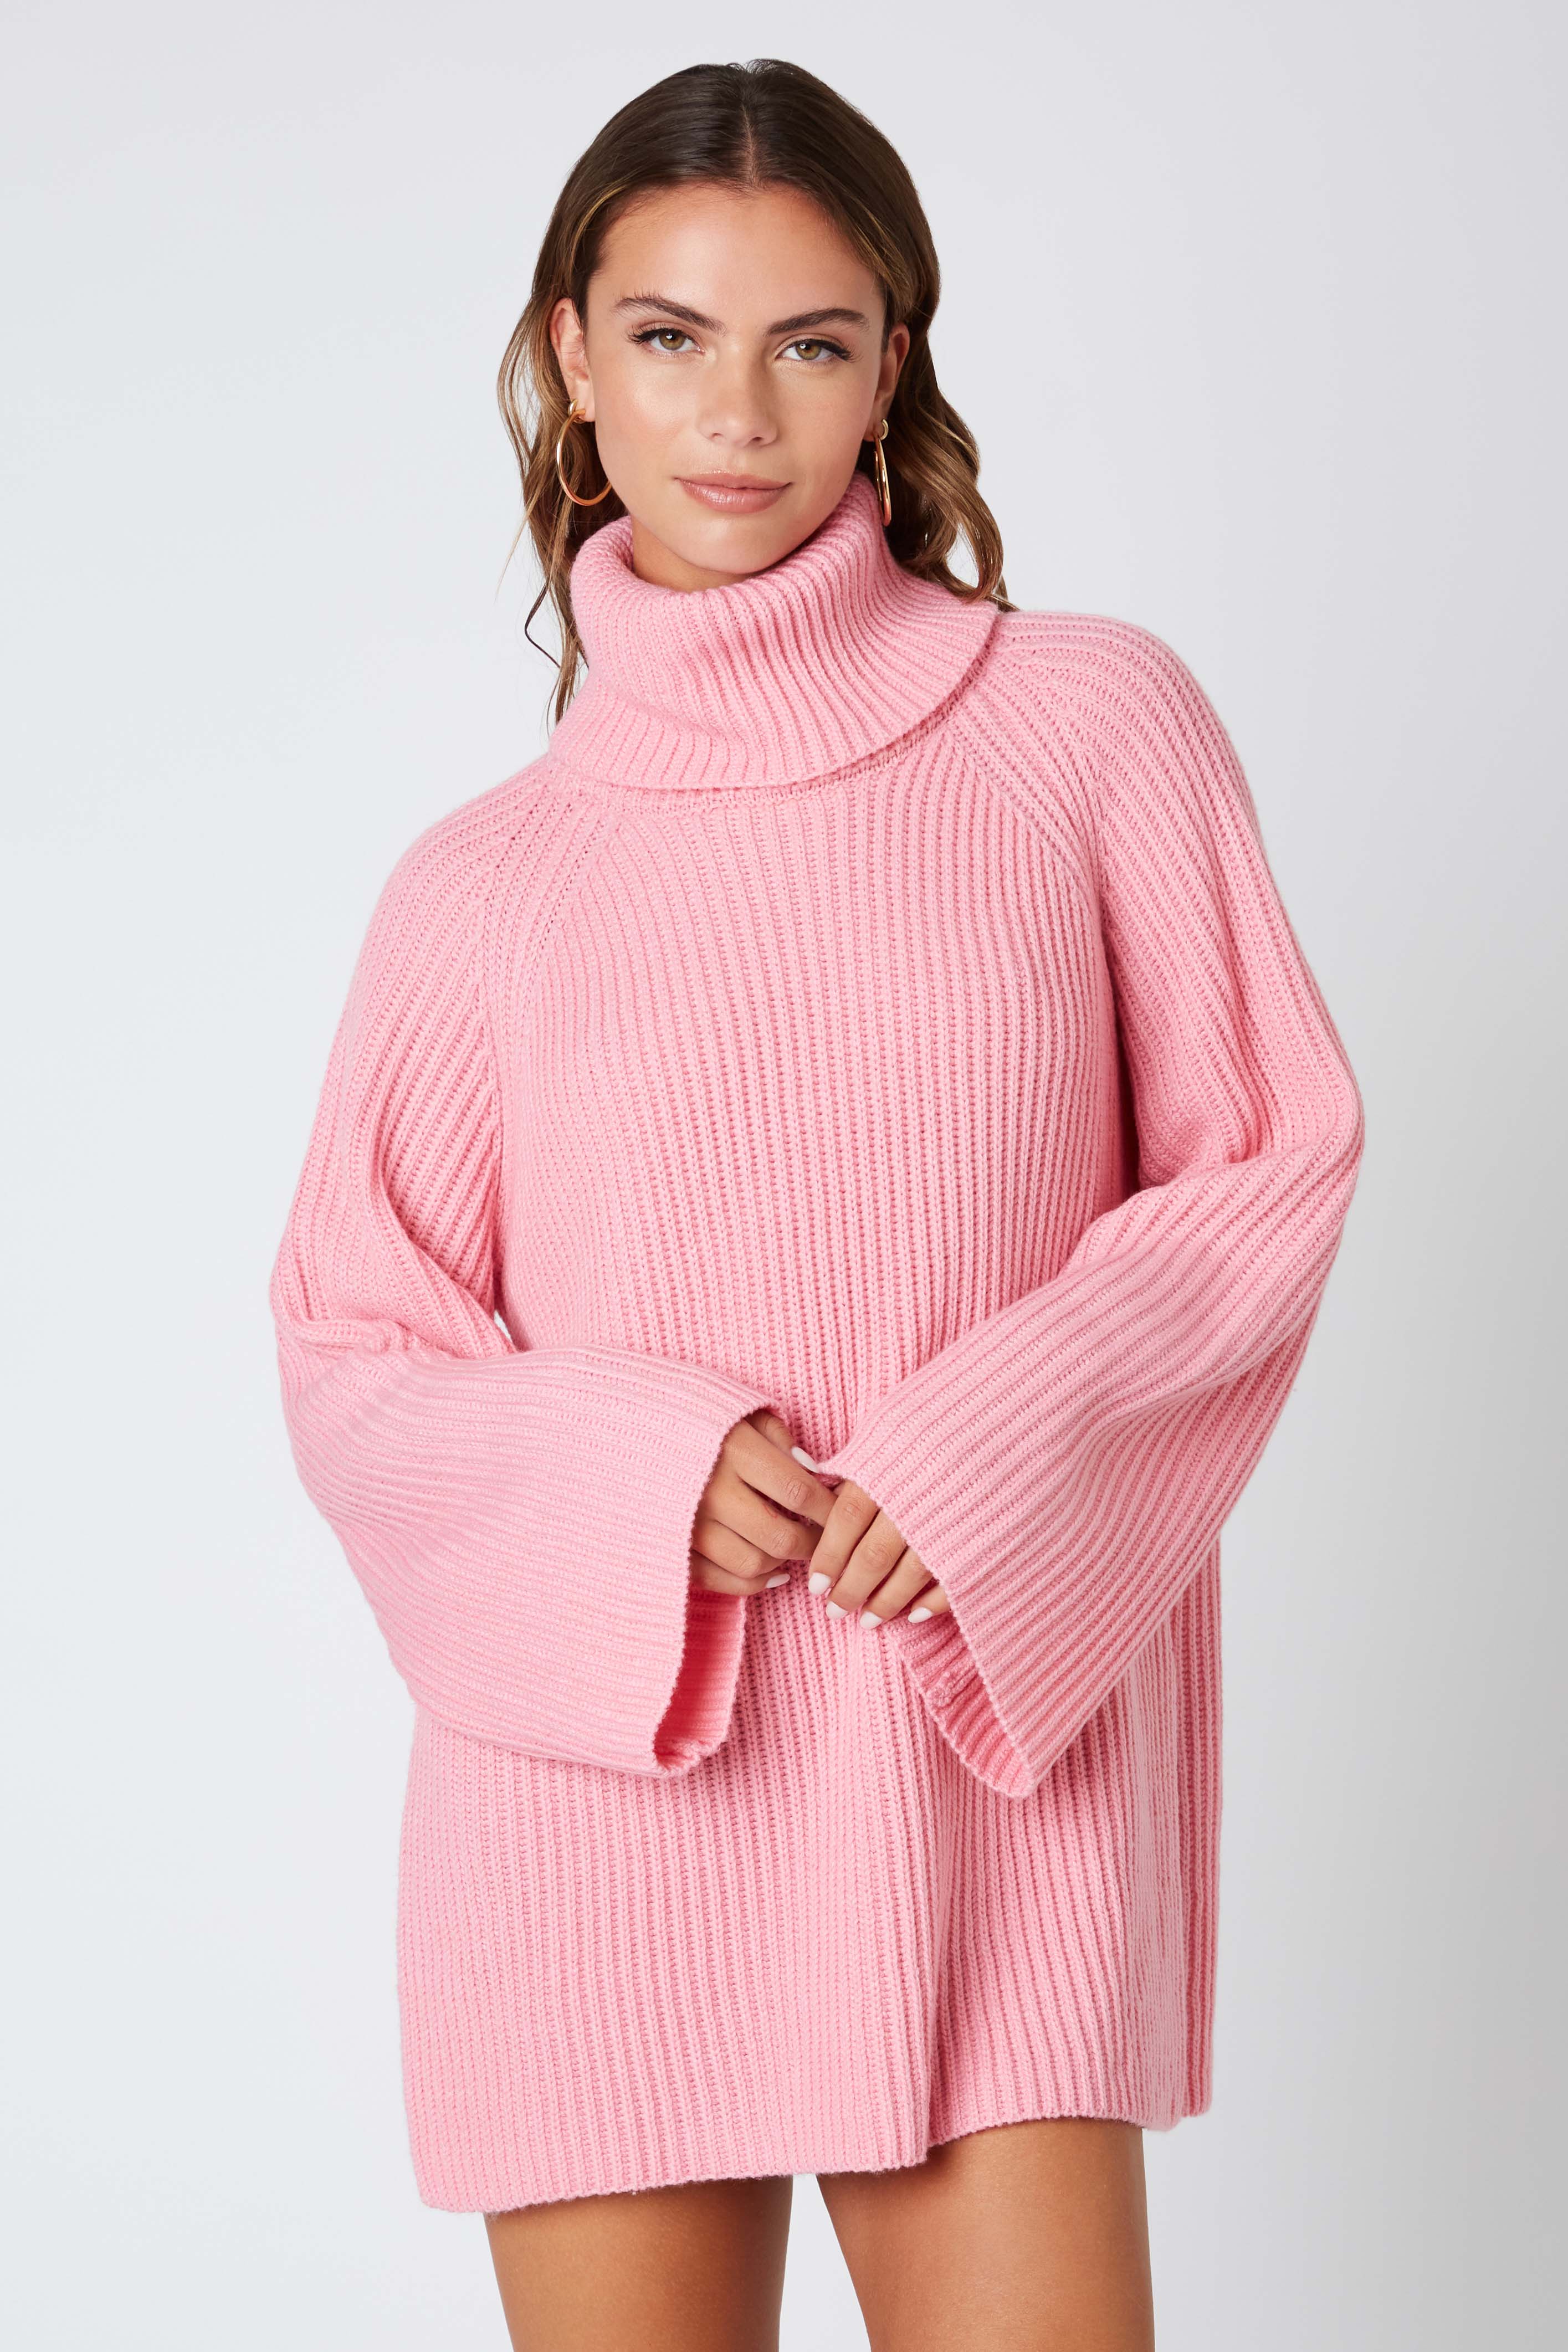 Oversized Turtleneck Sweater in Pink Front View